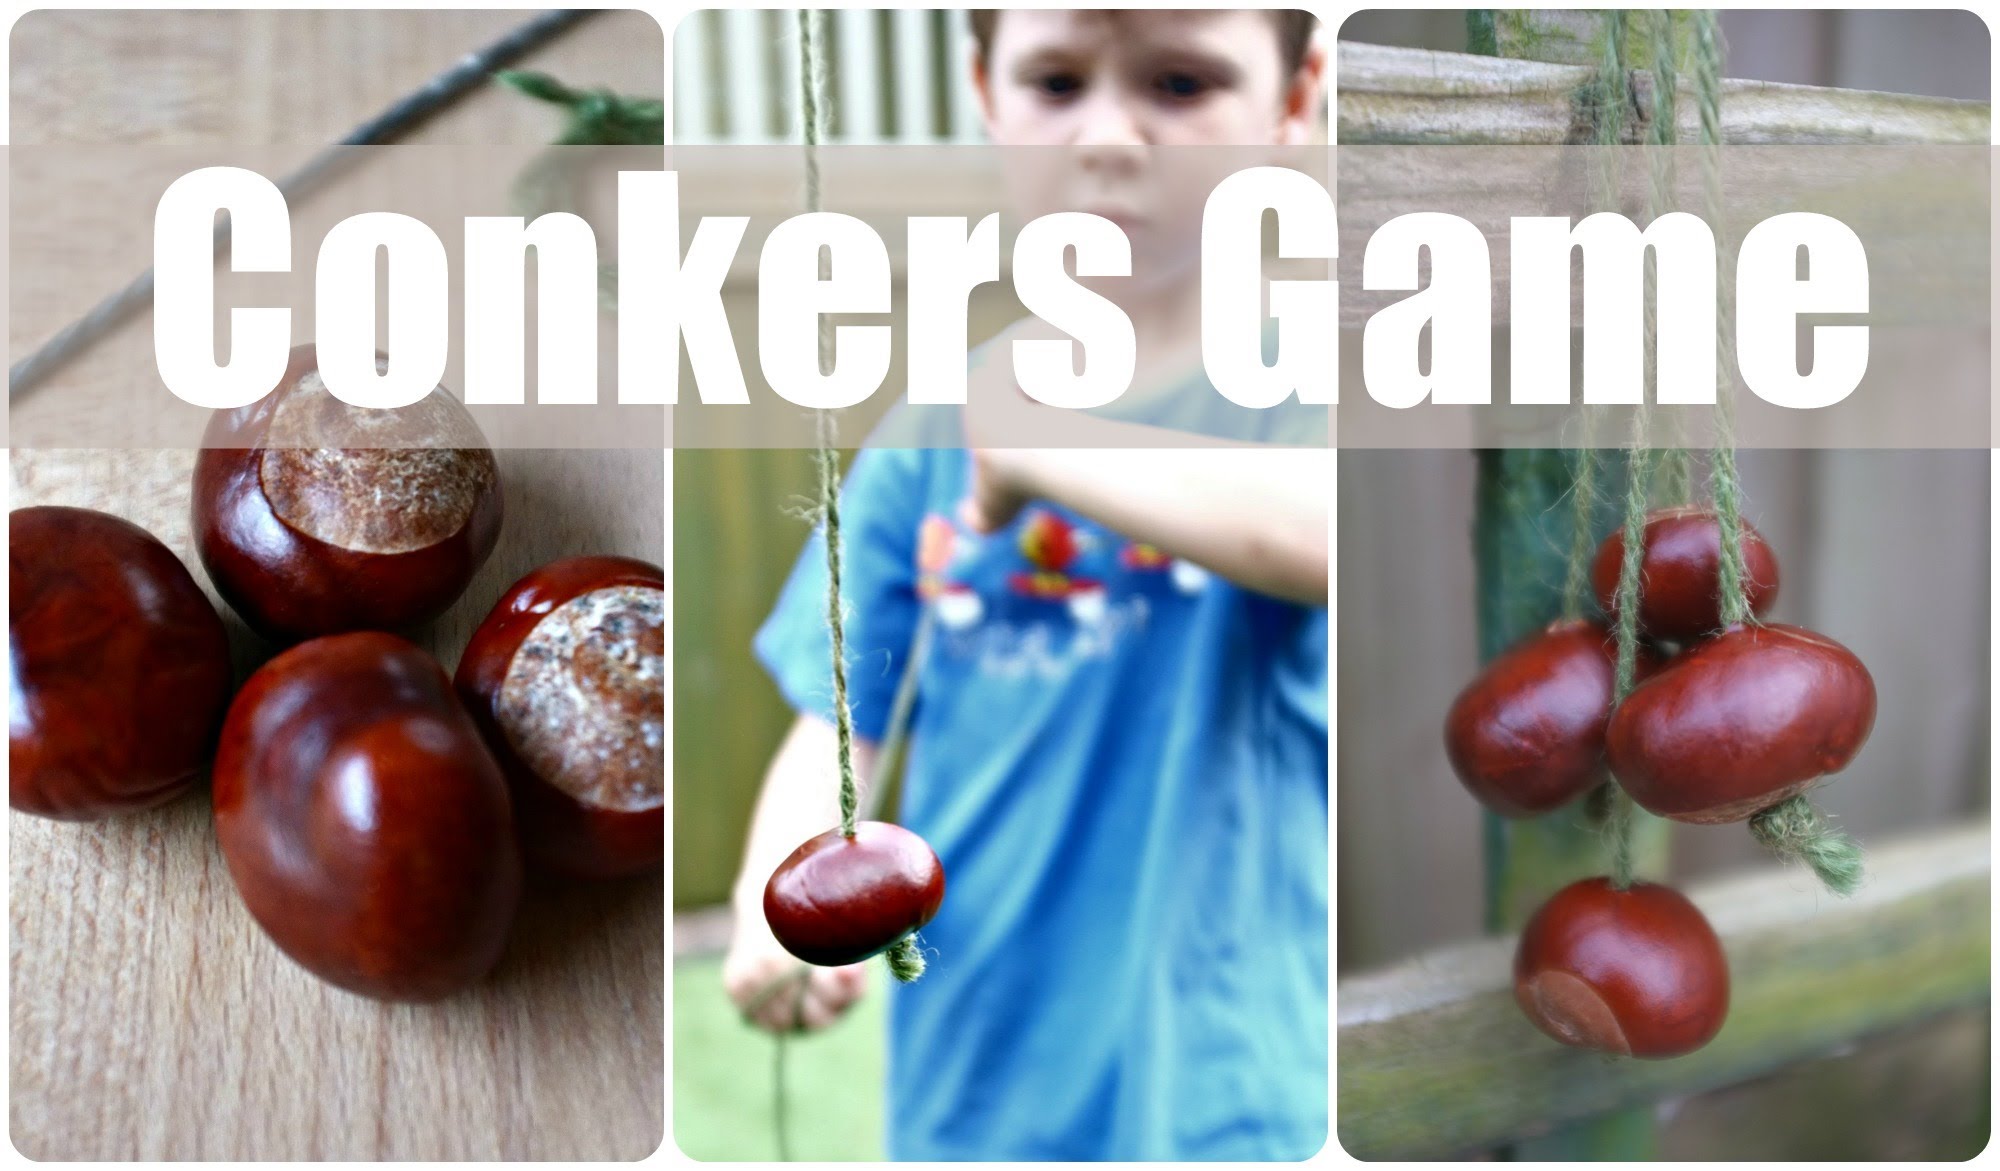 How to Play Conkers (Horse Chestnuts) - YouTube